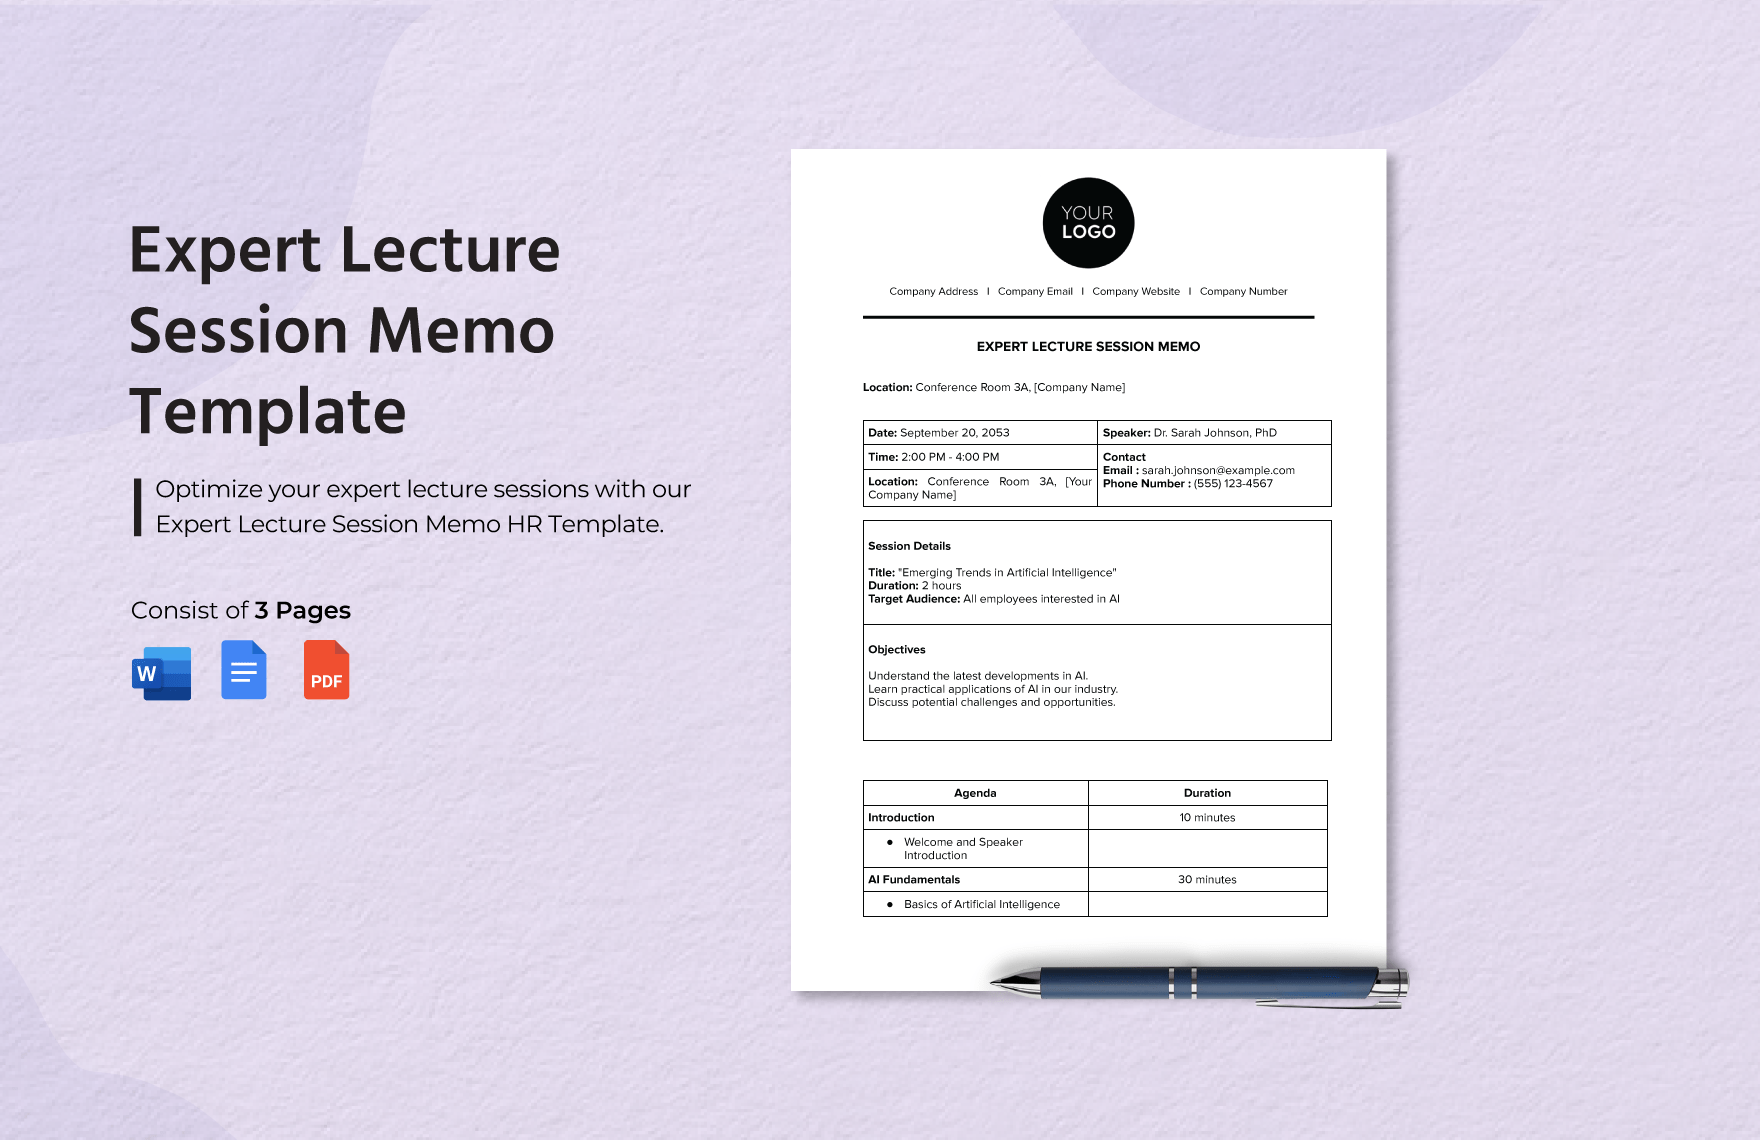 Expert Lecture Session Memo Template